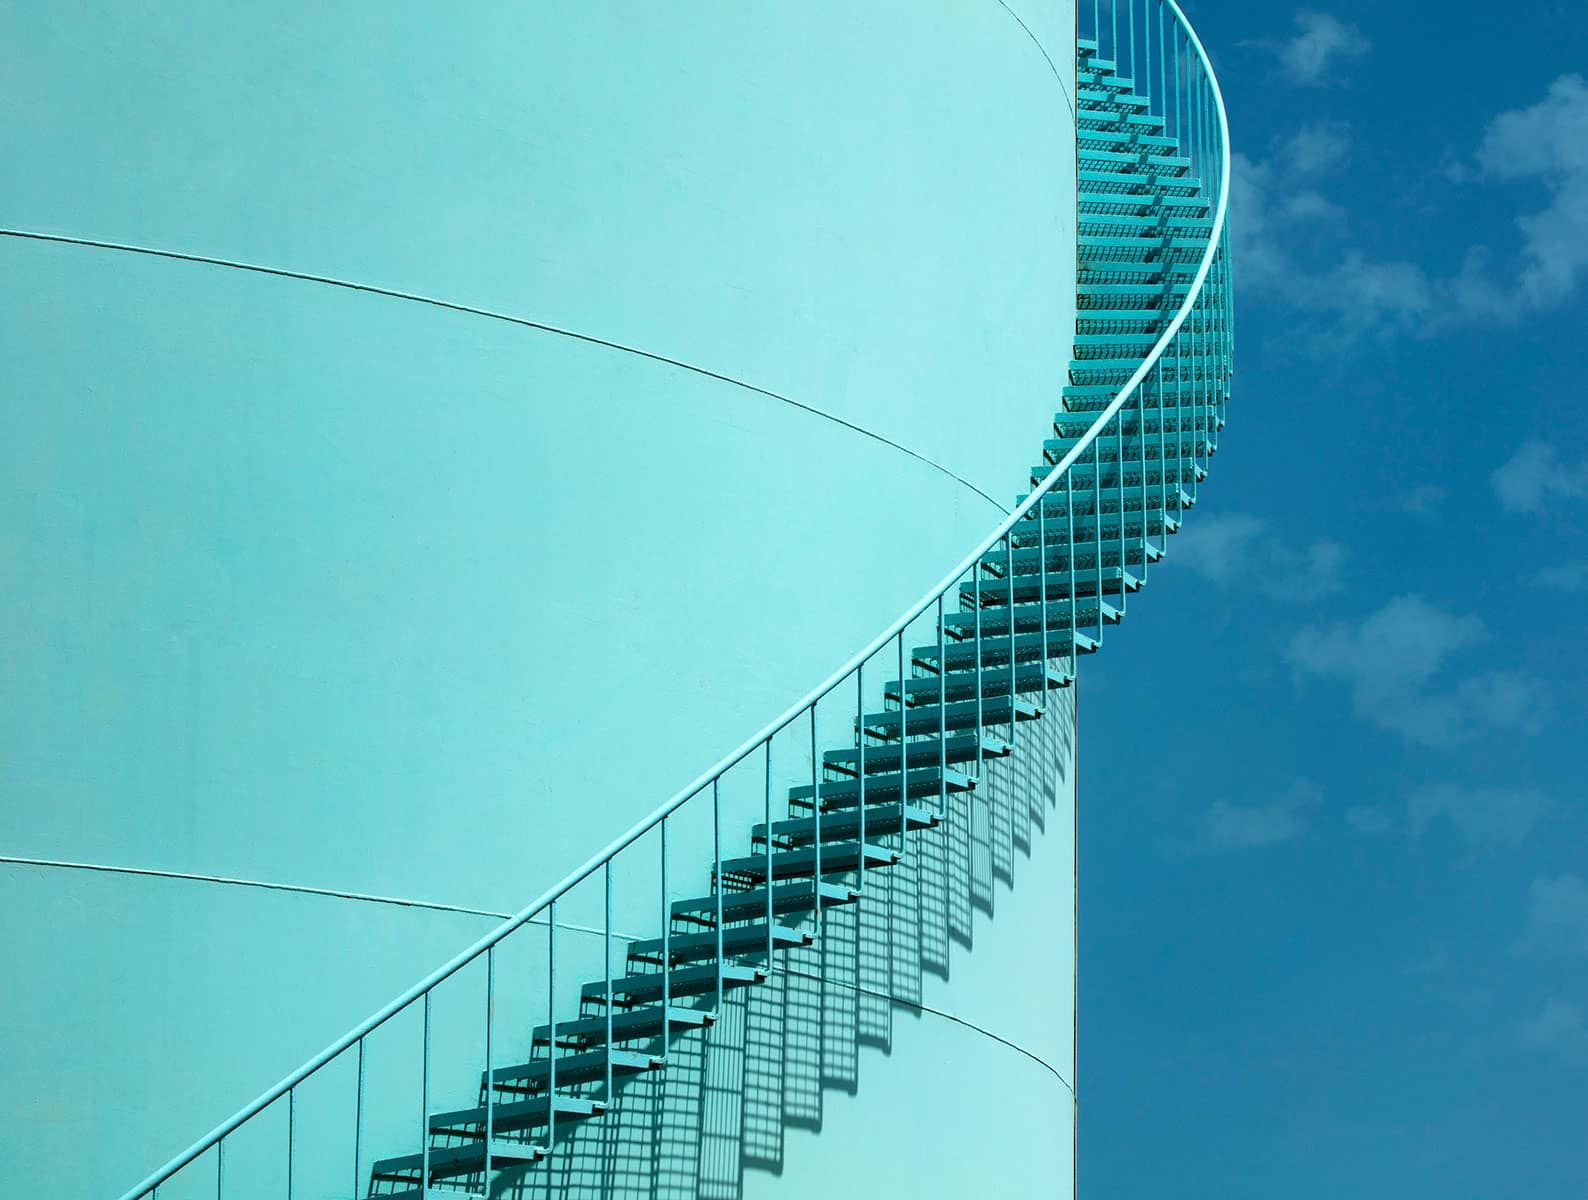 Architecture Photography Bahrain: Detail of oil storage tank and perimeter staircase at Bapco, Bahrain.